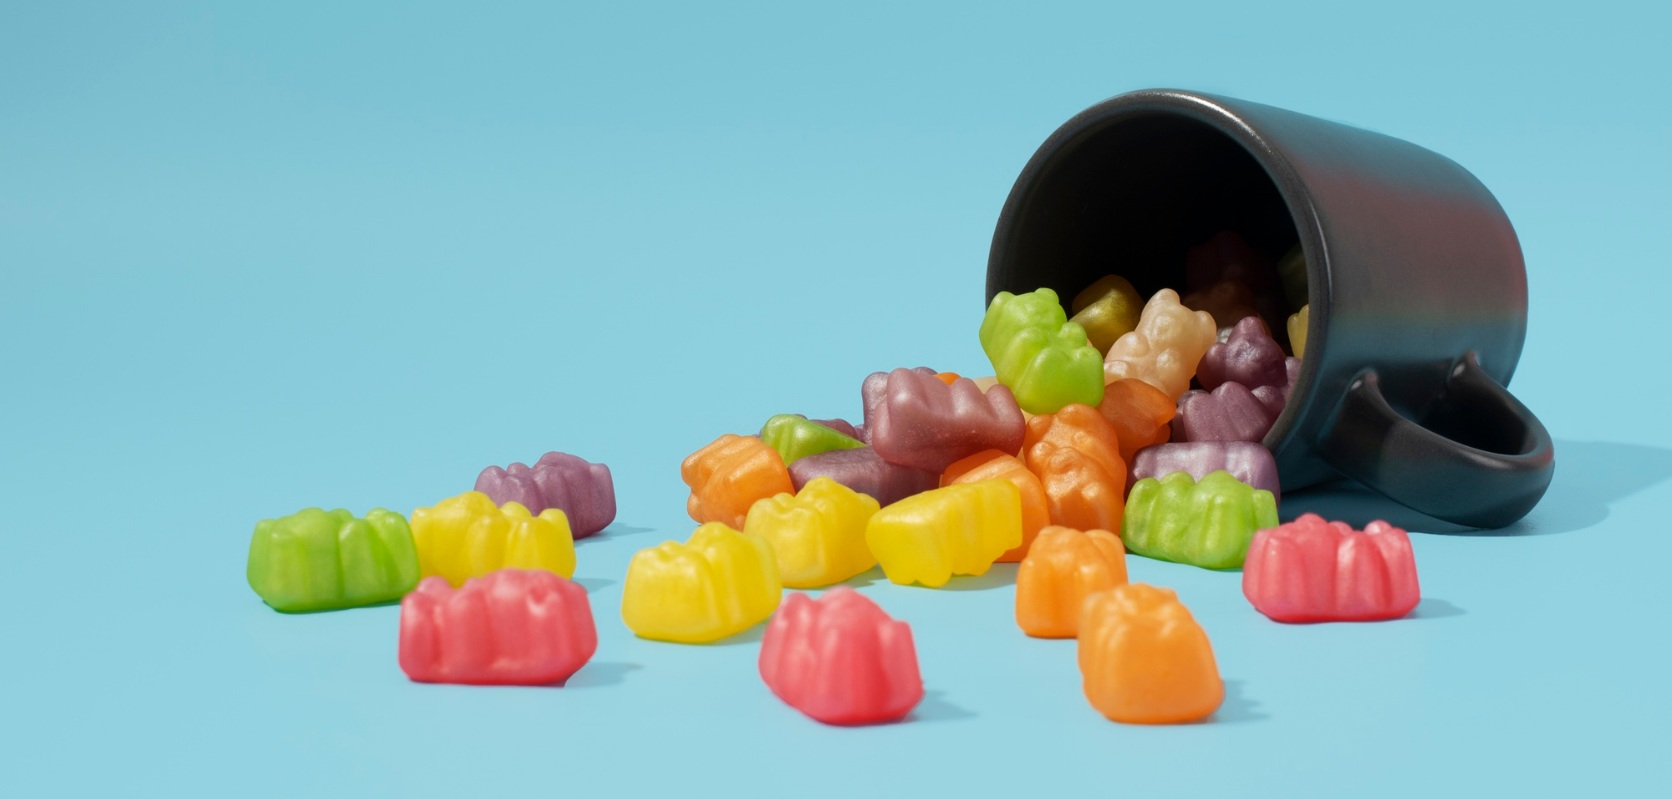 Before mastering how to make cannabis gummies, let's briefly discuss edibles. What are they and why do you need them? 